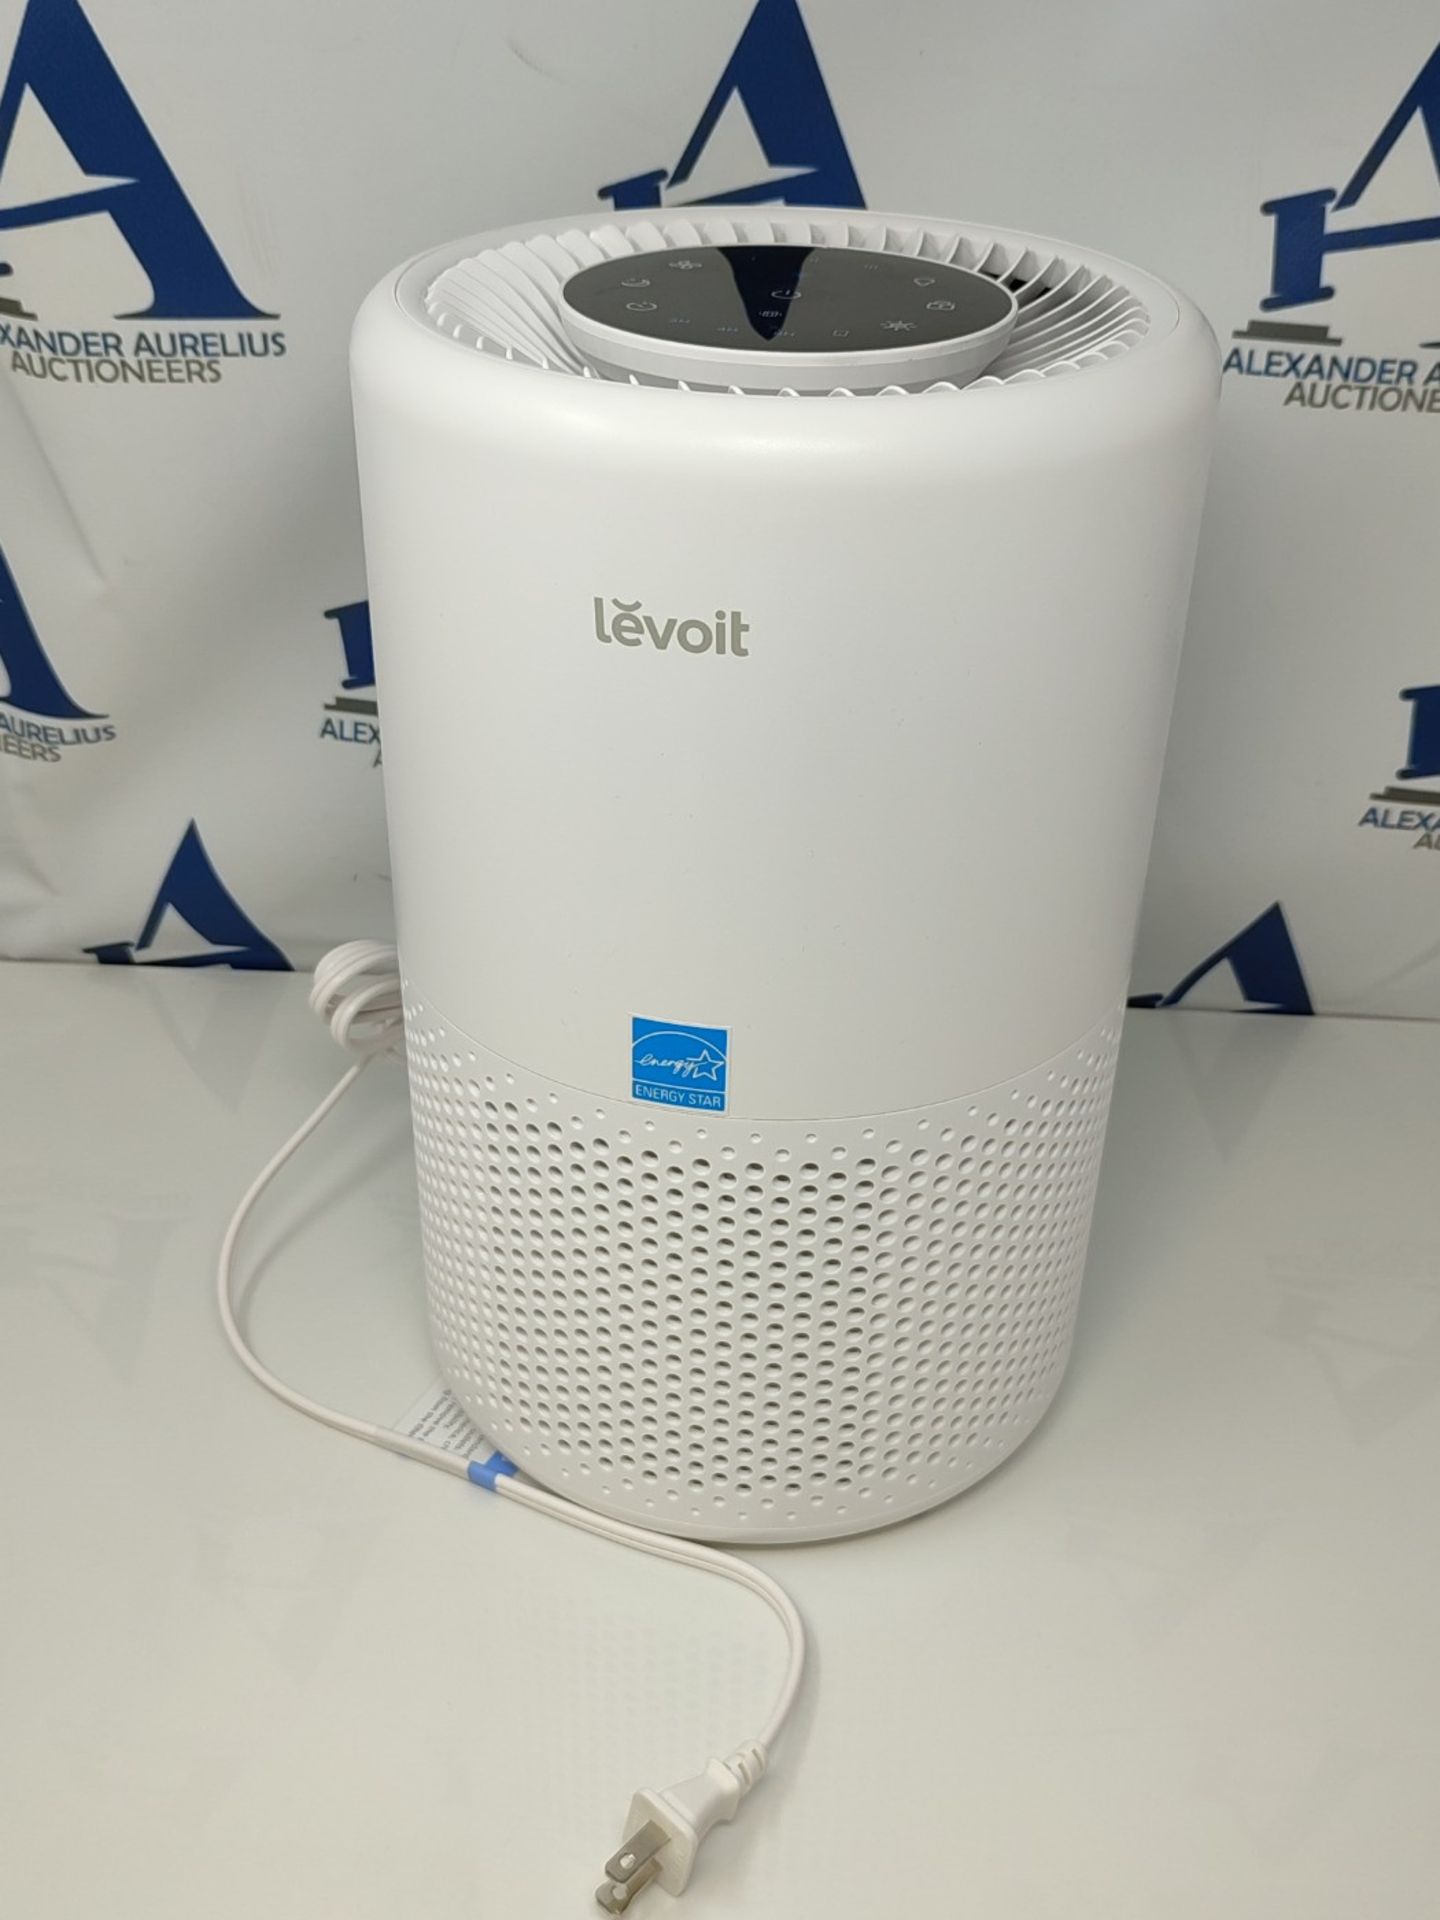 RRP £76.00 LEVOIT Smart WiFi Air Purifier for Home, Alexa Enabled H13 HEPA Filter, CADR 170m³/h, - Image 3 of 3